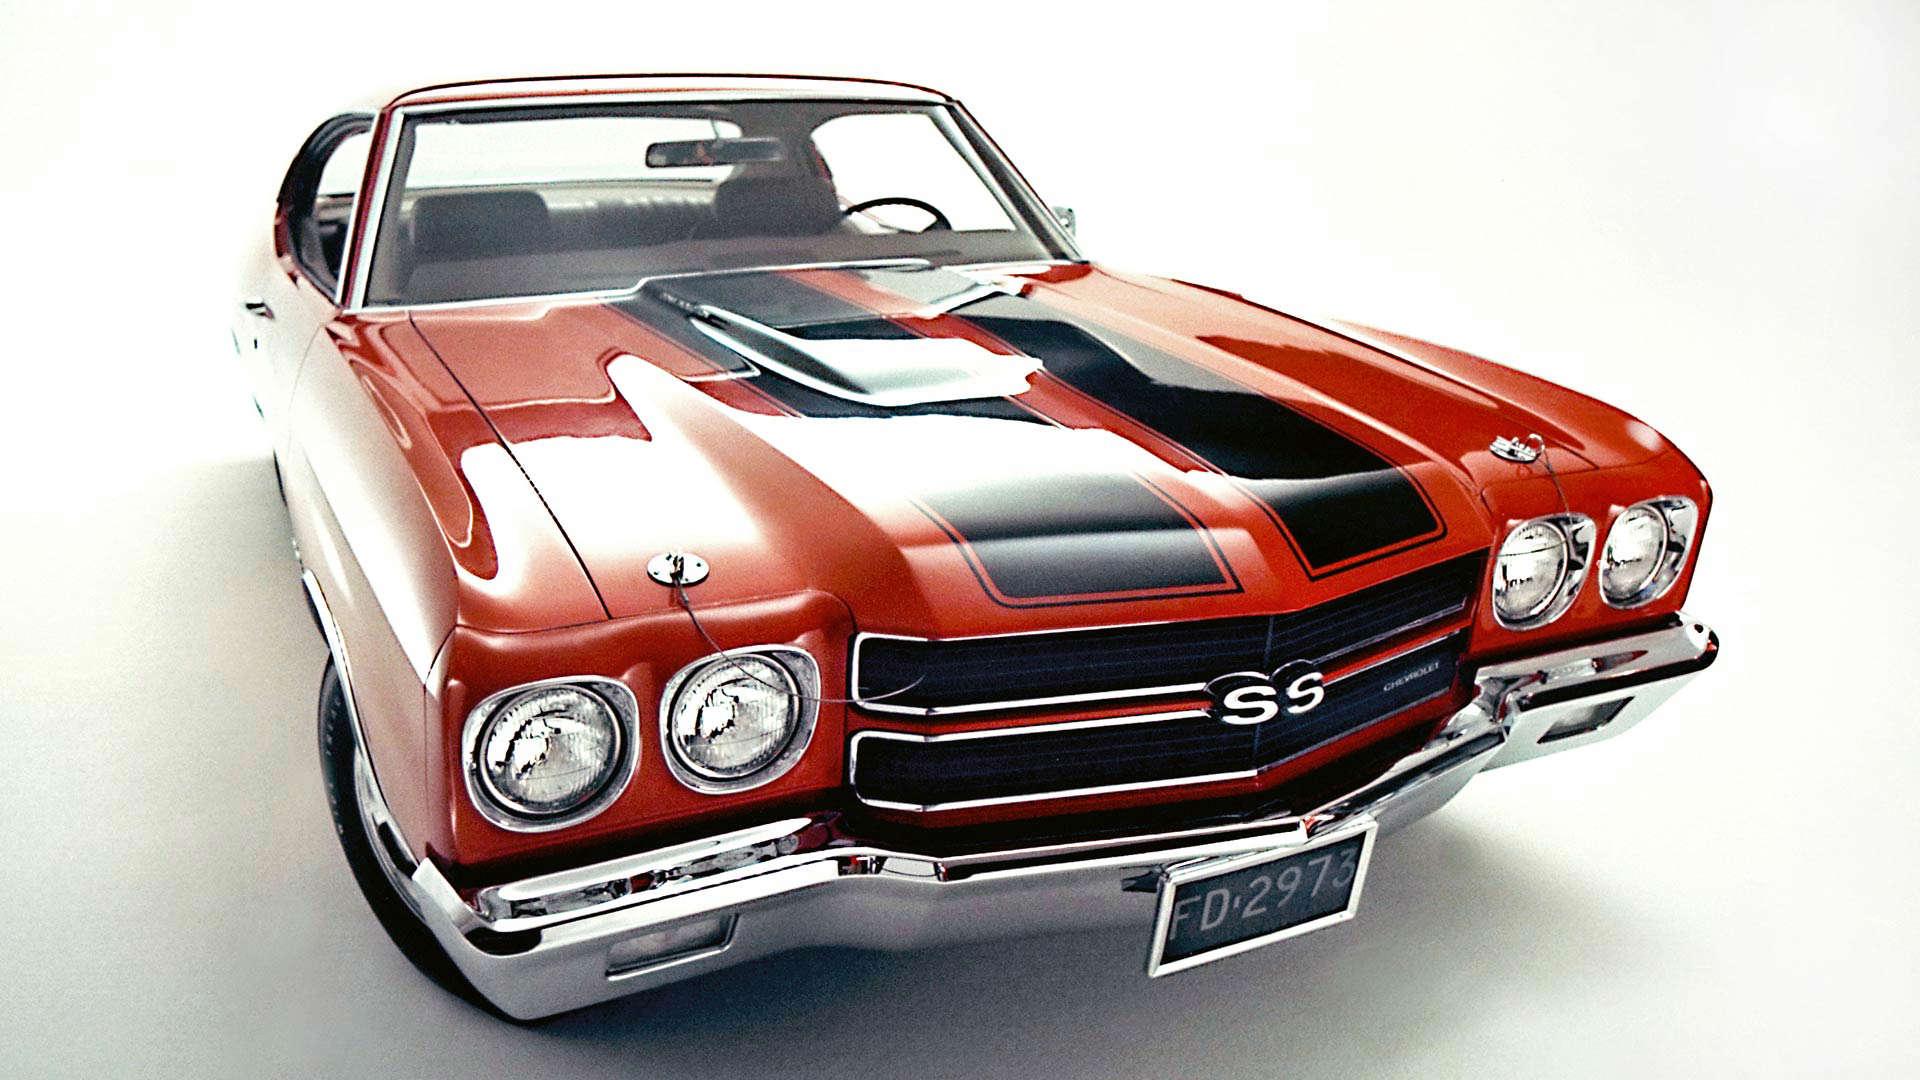 Slide 22 of 33: A genuine legend in the muscle car world, the 1970 Chevelle SS could be fitted with truly terrifying performance. Even the base 454-ci V8 came with 360hp, which was more than sufficient for a 1970’s machine. Yet ticking the box of the LS6 package added a Holley four-barrel carburettor, which took output to a monster 450 hp and 500 lb-ft of torque. Many believed Chevrolet underrated these figures, with the real number claimed to have exceeded 500 hp.